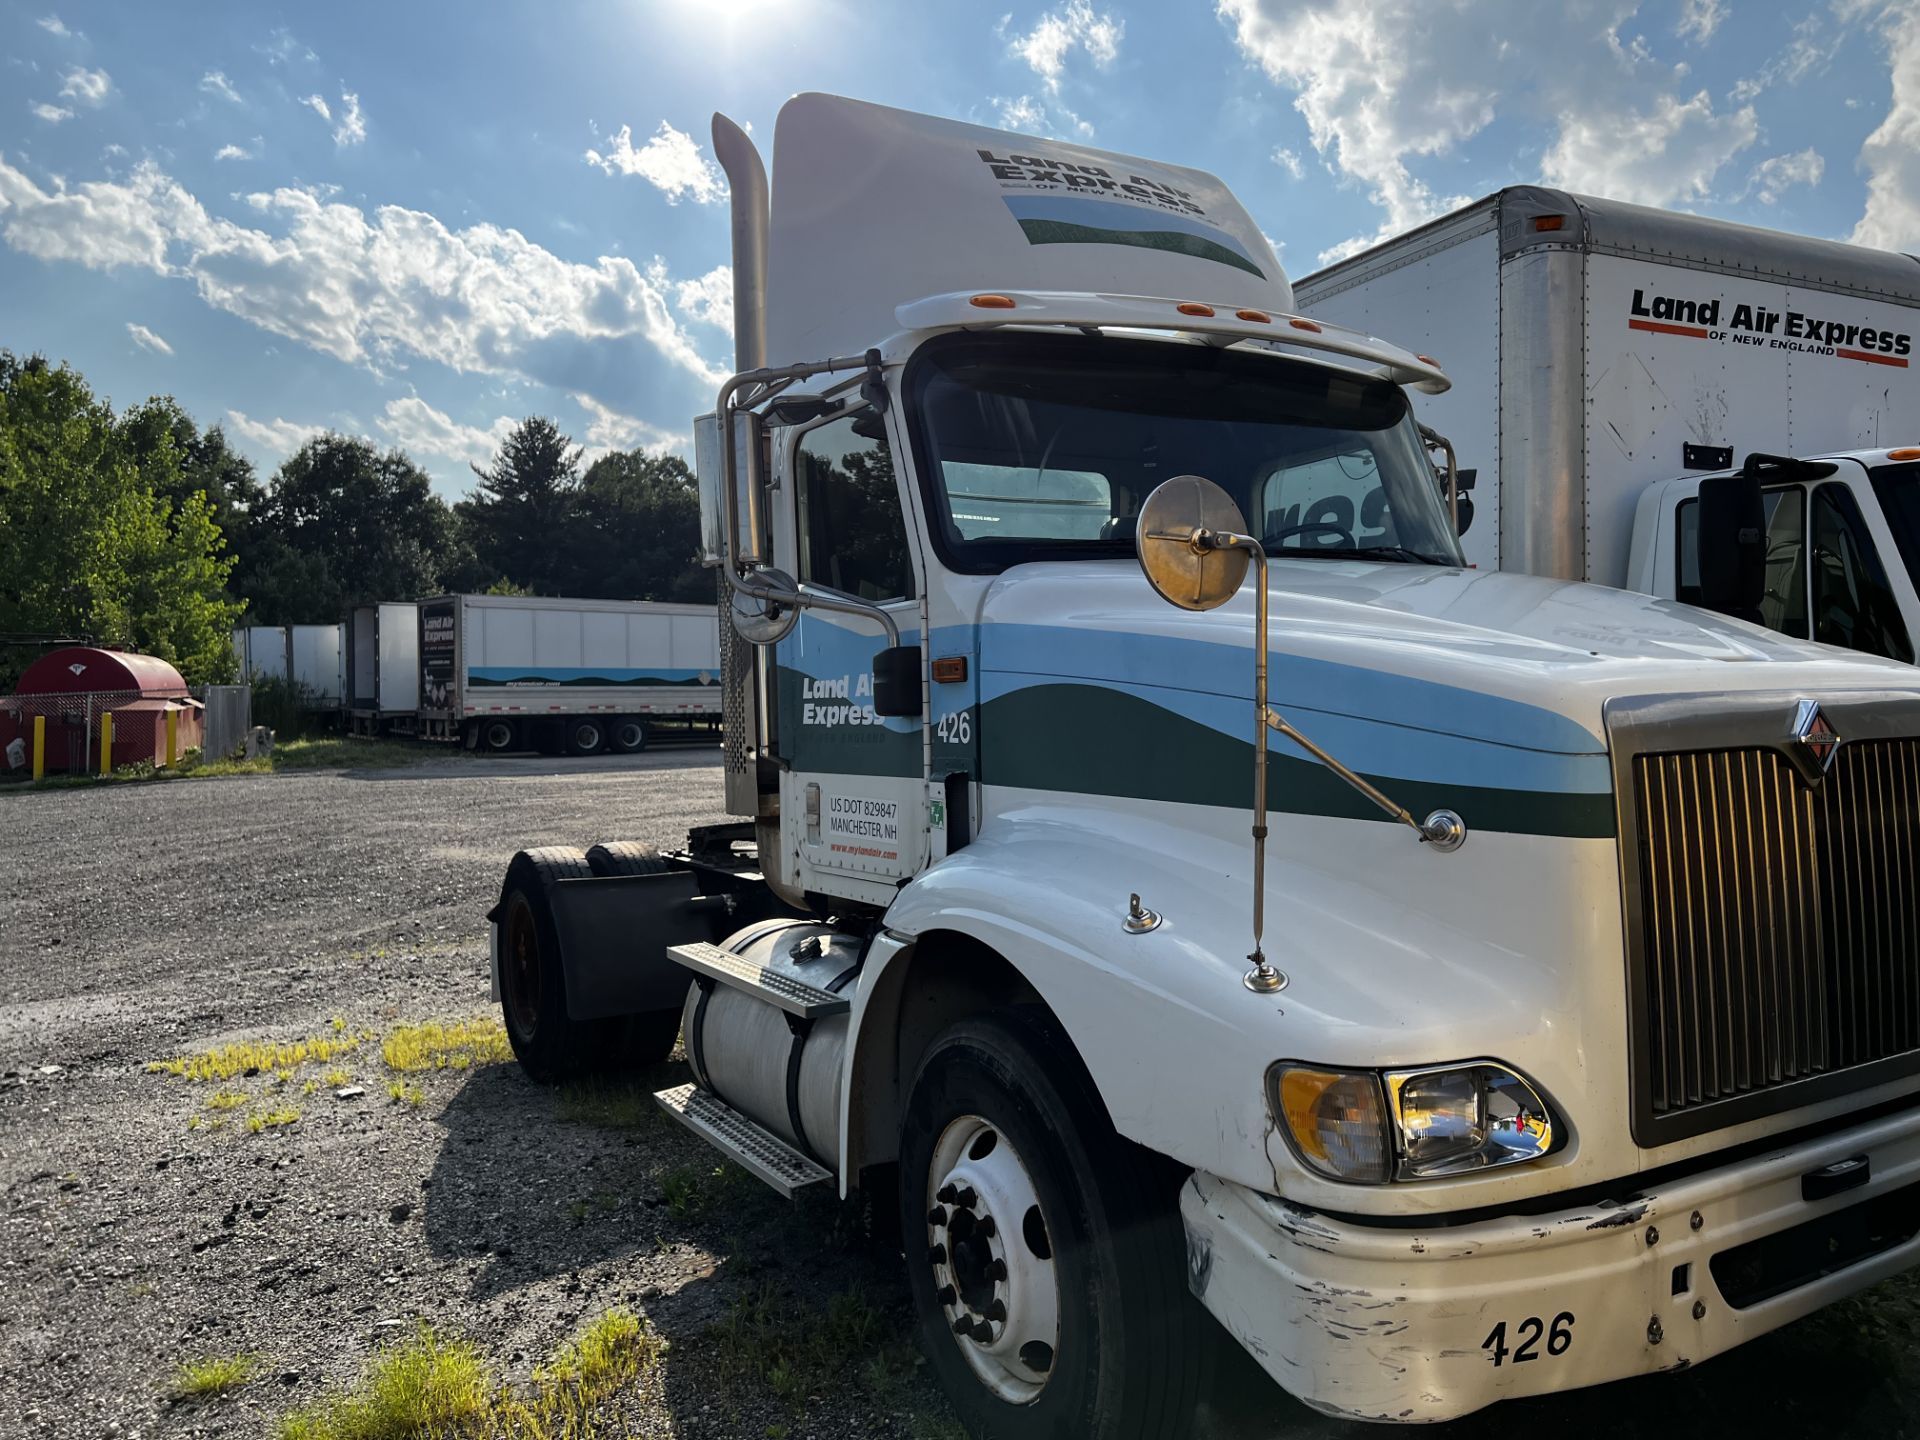 2006 Int'l 9200 iSBA 4 x 2, 6 Wheel, Day Cab, Eaton, 10 Speed Hi LO, Unknown Motor, **NO TITLE** - Image 2 of 2